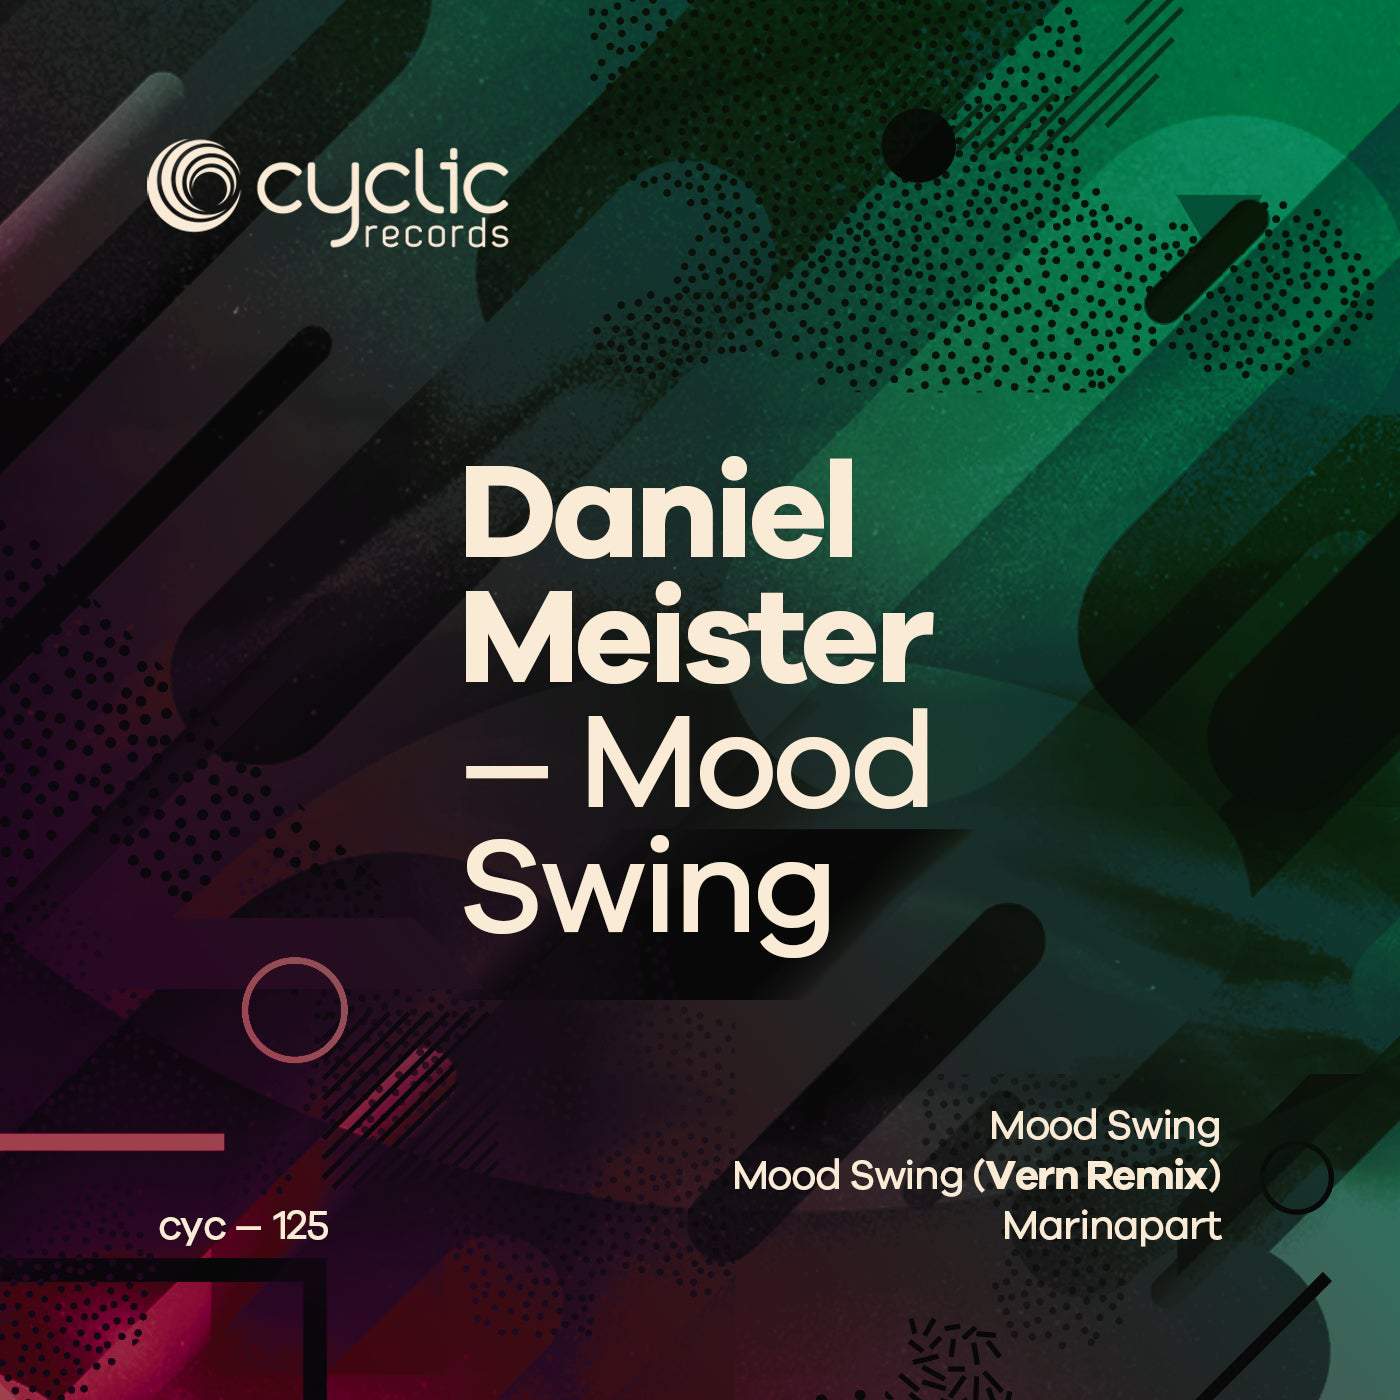 image cover: Daniel Meister - Mood Swing on Cyclic Records